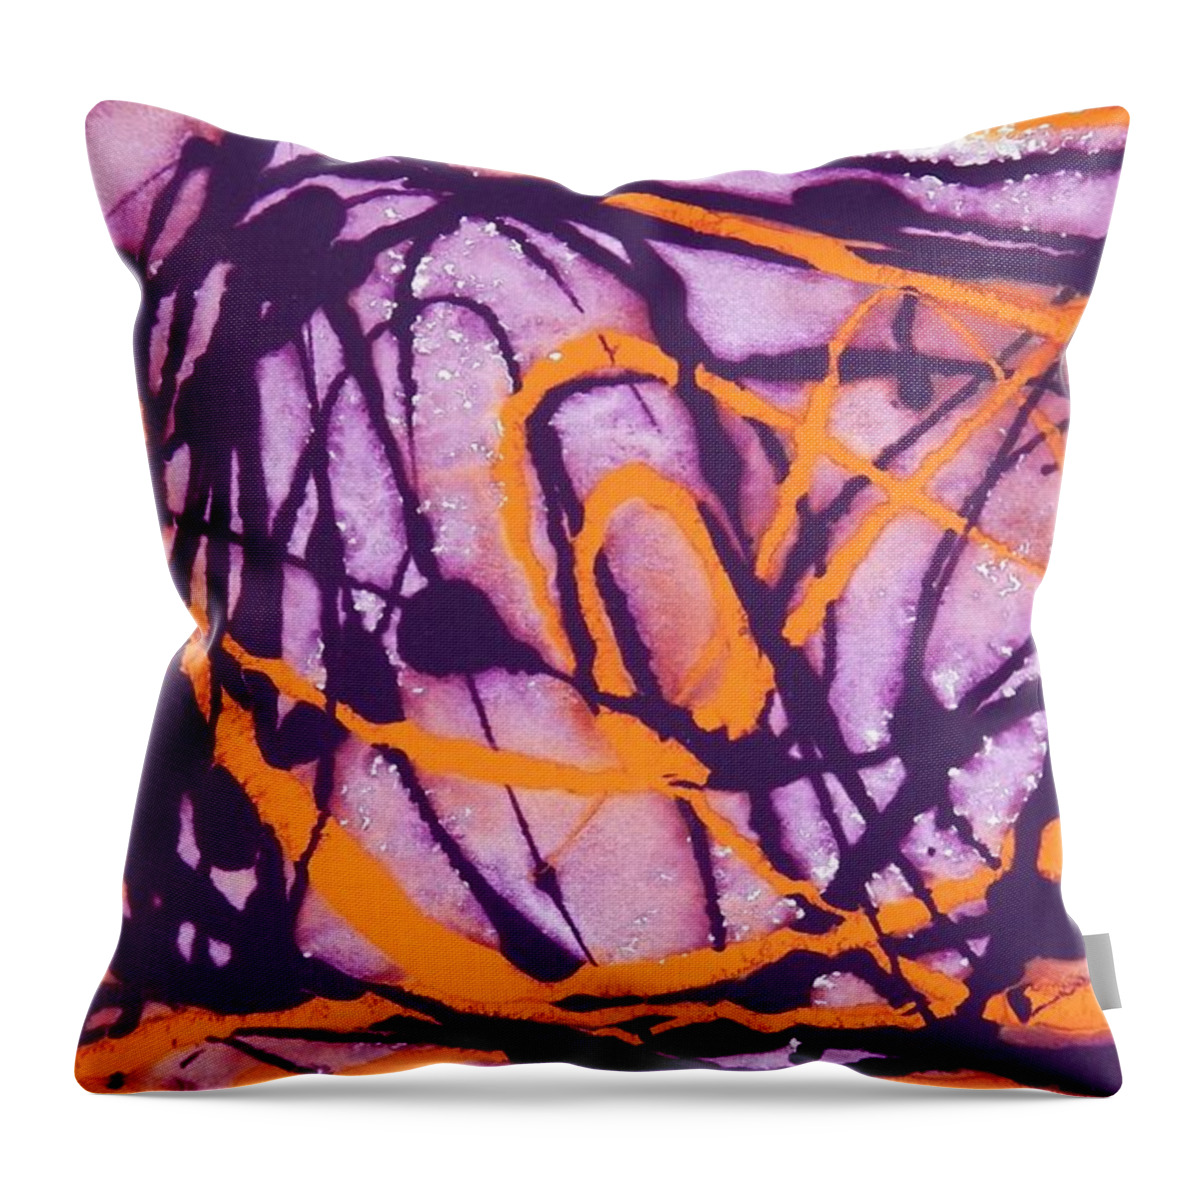 Abstract Throw Pillow featuring the painting Sunset Twilight by Corinne Elizabeth Cowherd